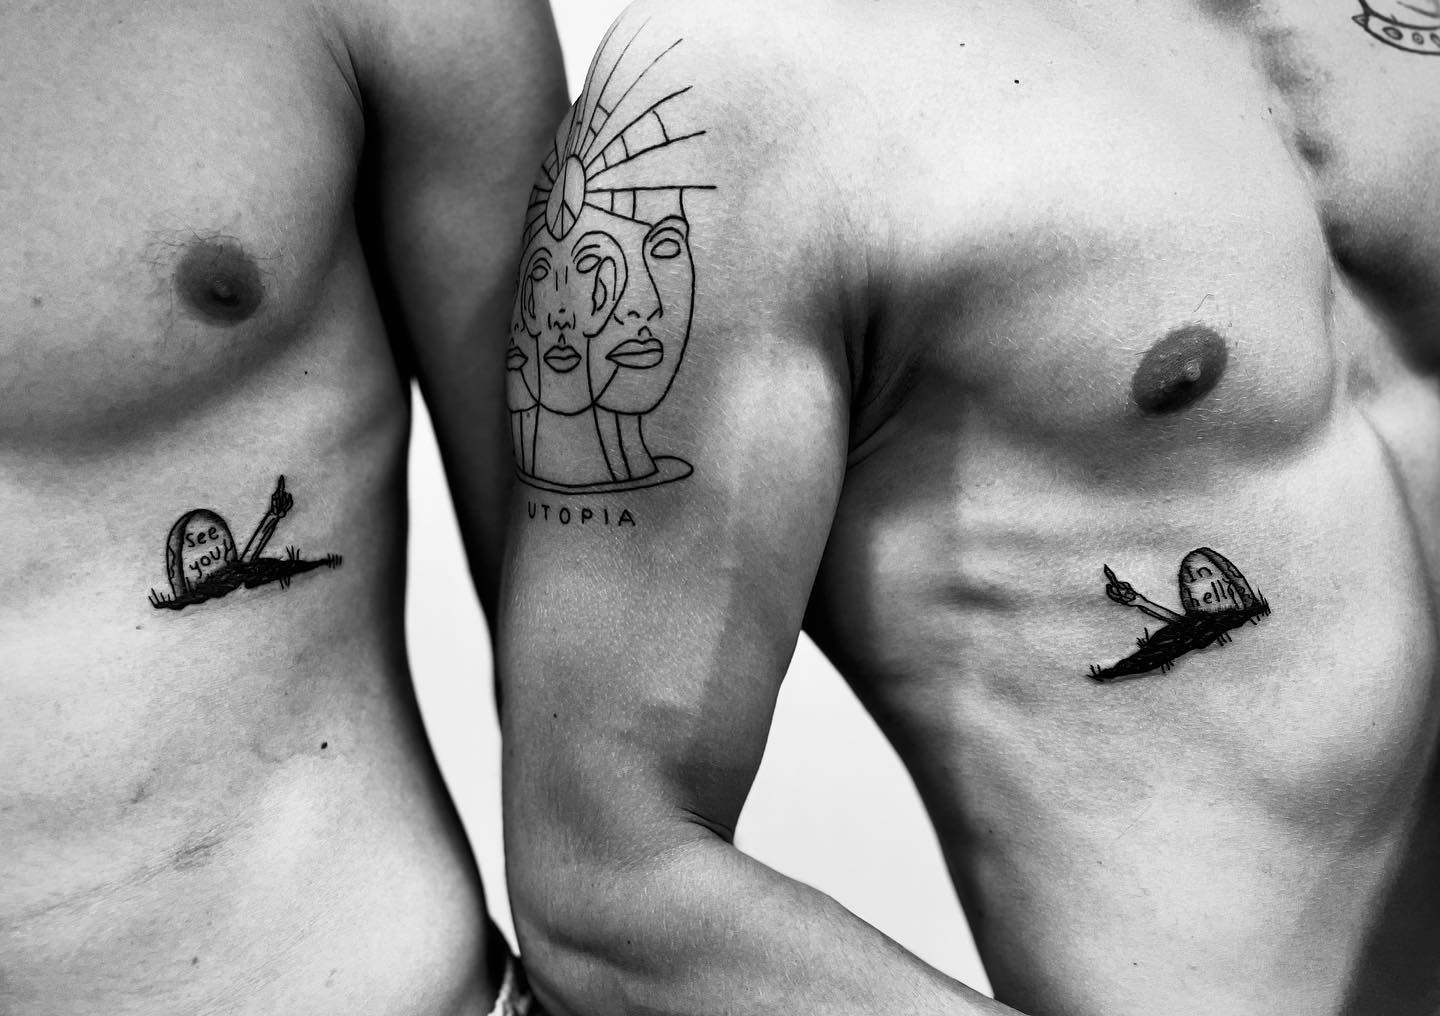 Couples Tattoo Ideas, Matching Tattoos For Couples